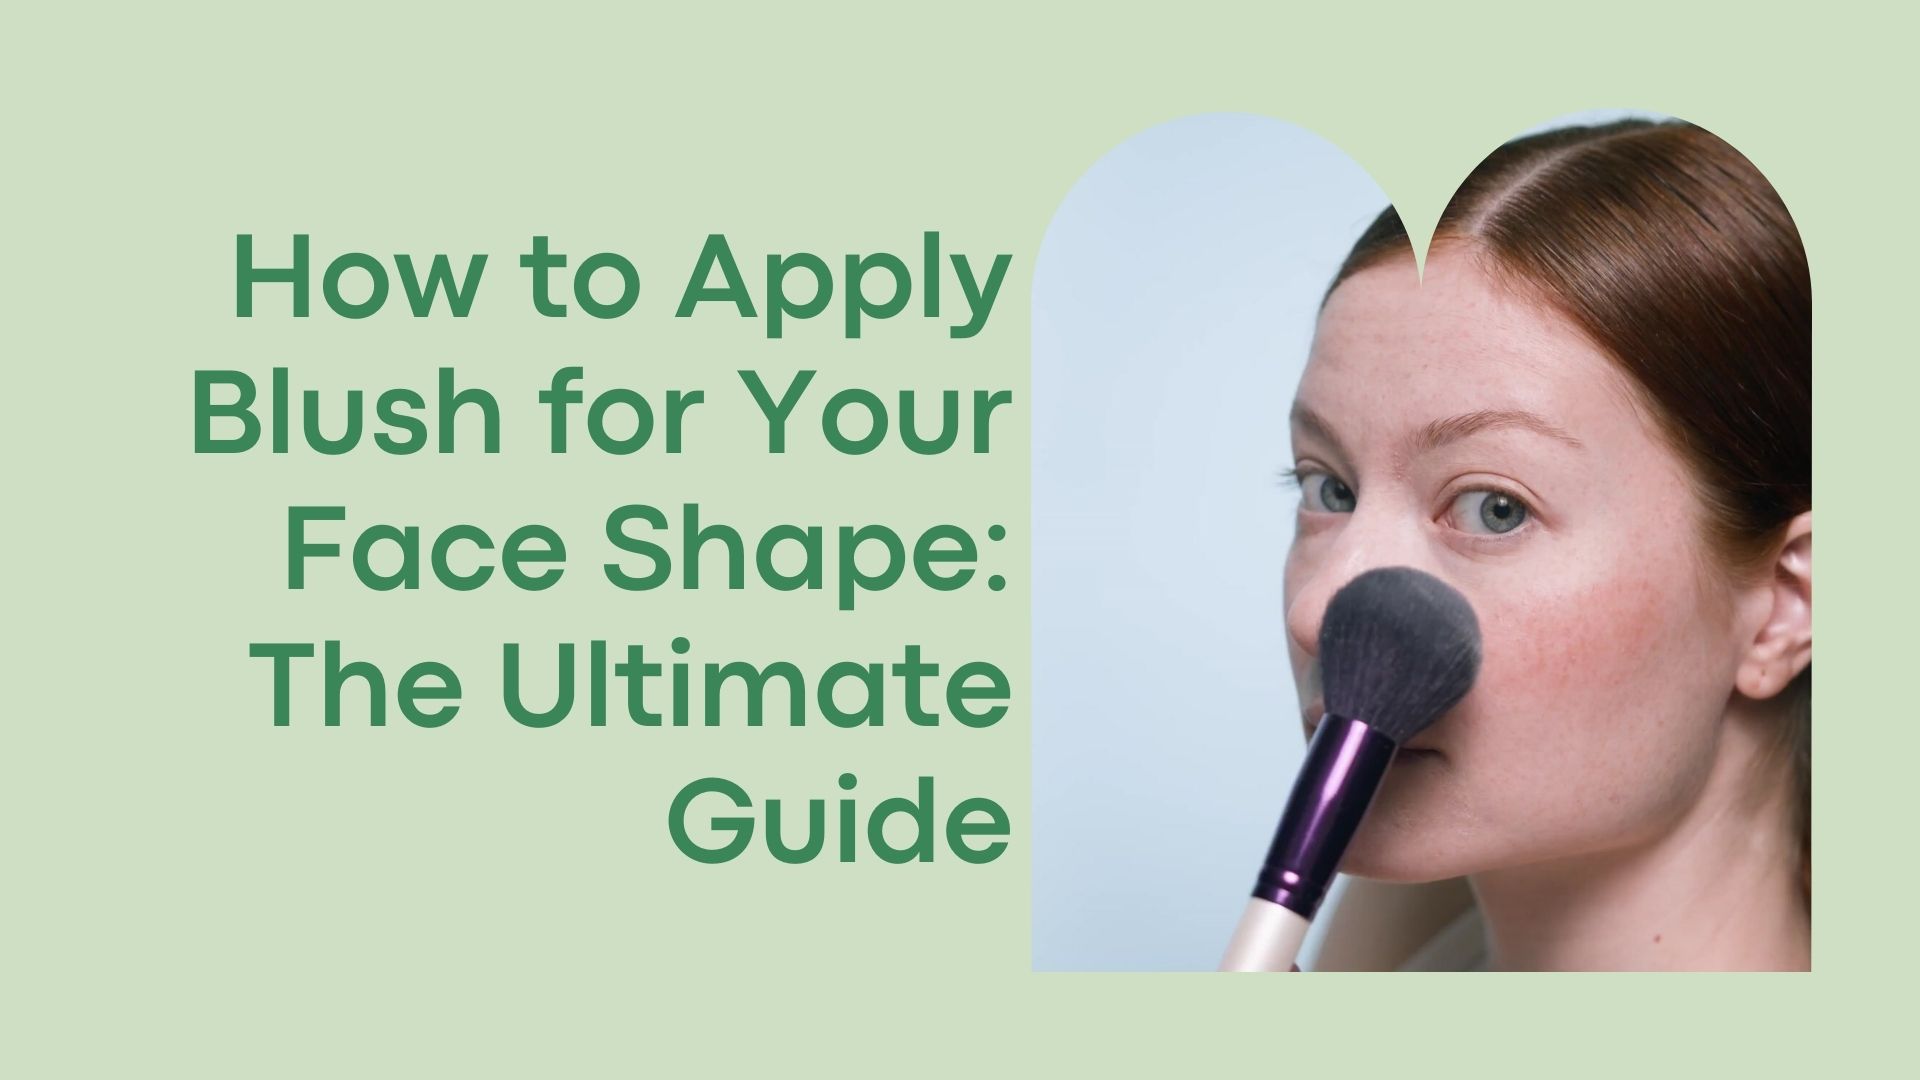 How to Apply Blush for Your Face Shape: The Ultimate Guide